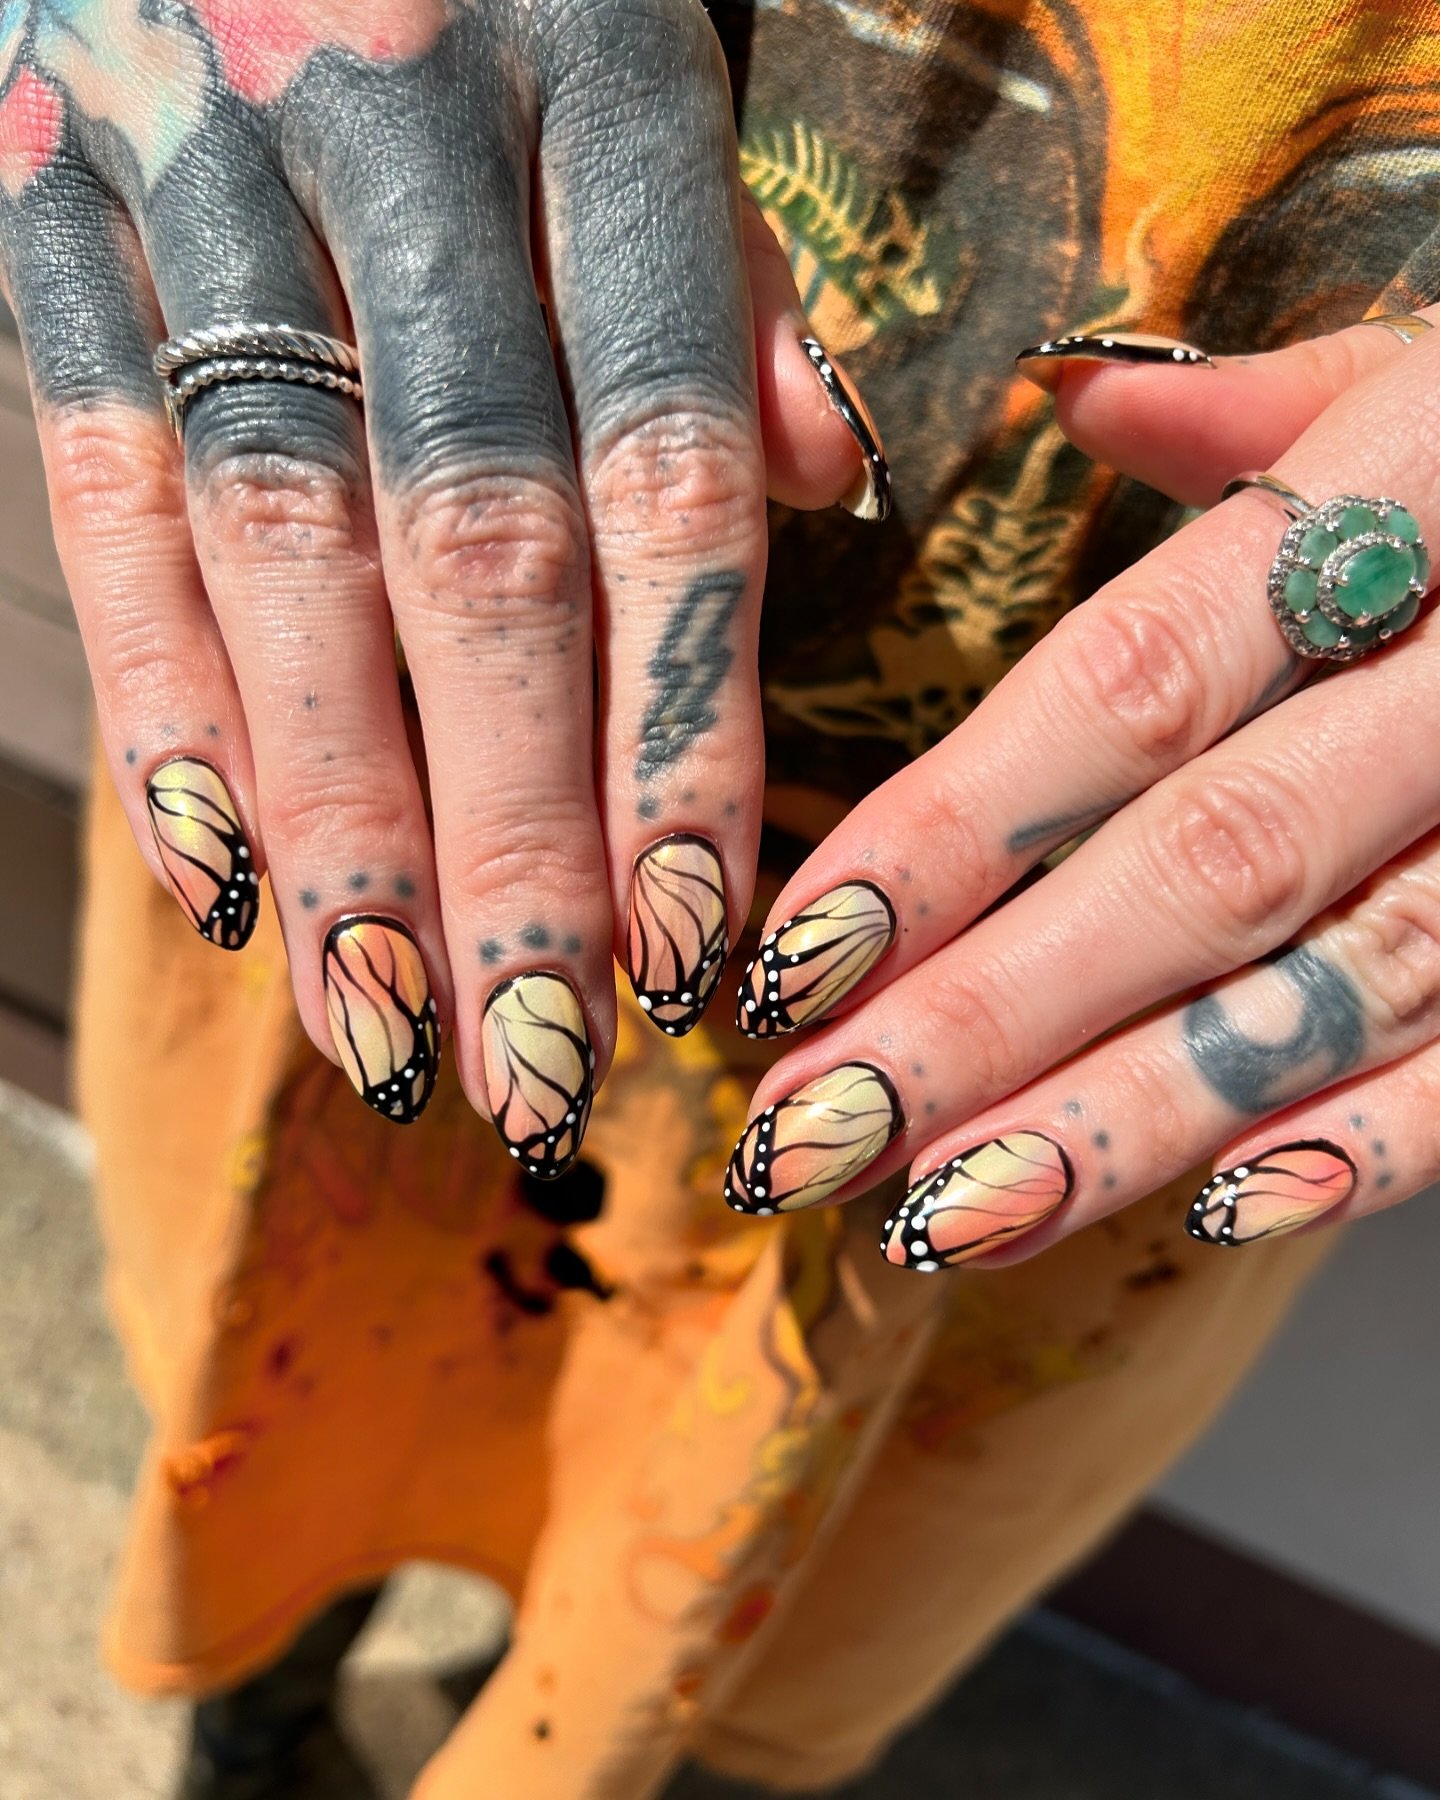 🧡 butterfly birthday set on our girl @slatenails_katie 🧡

nail art done by the one &amp; only @slatenails_michelle